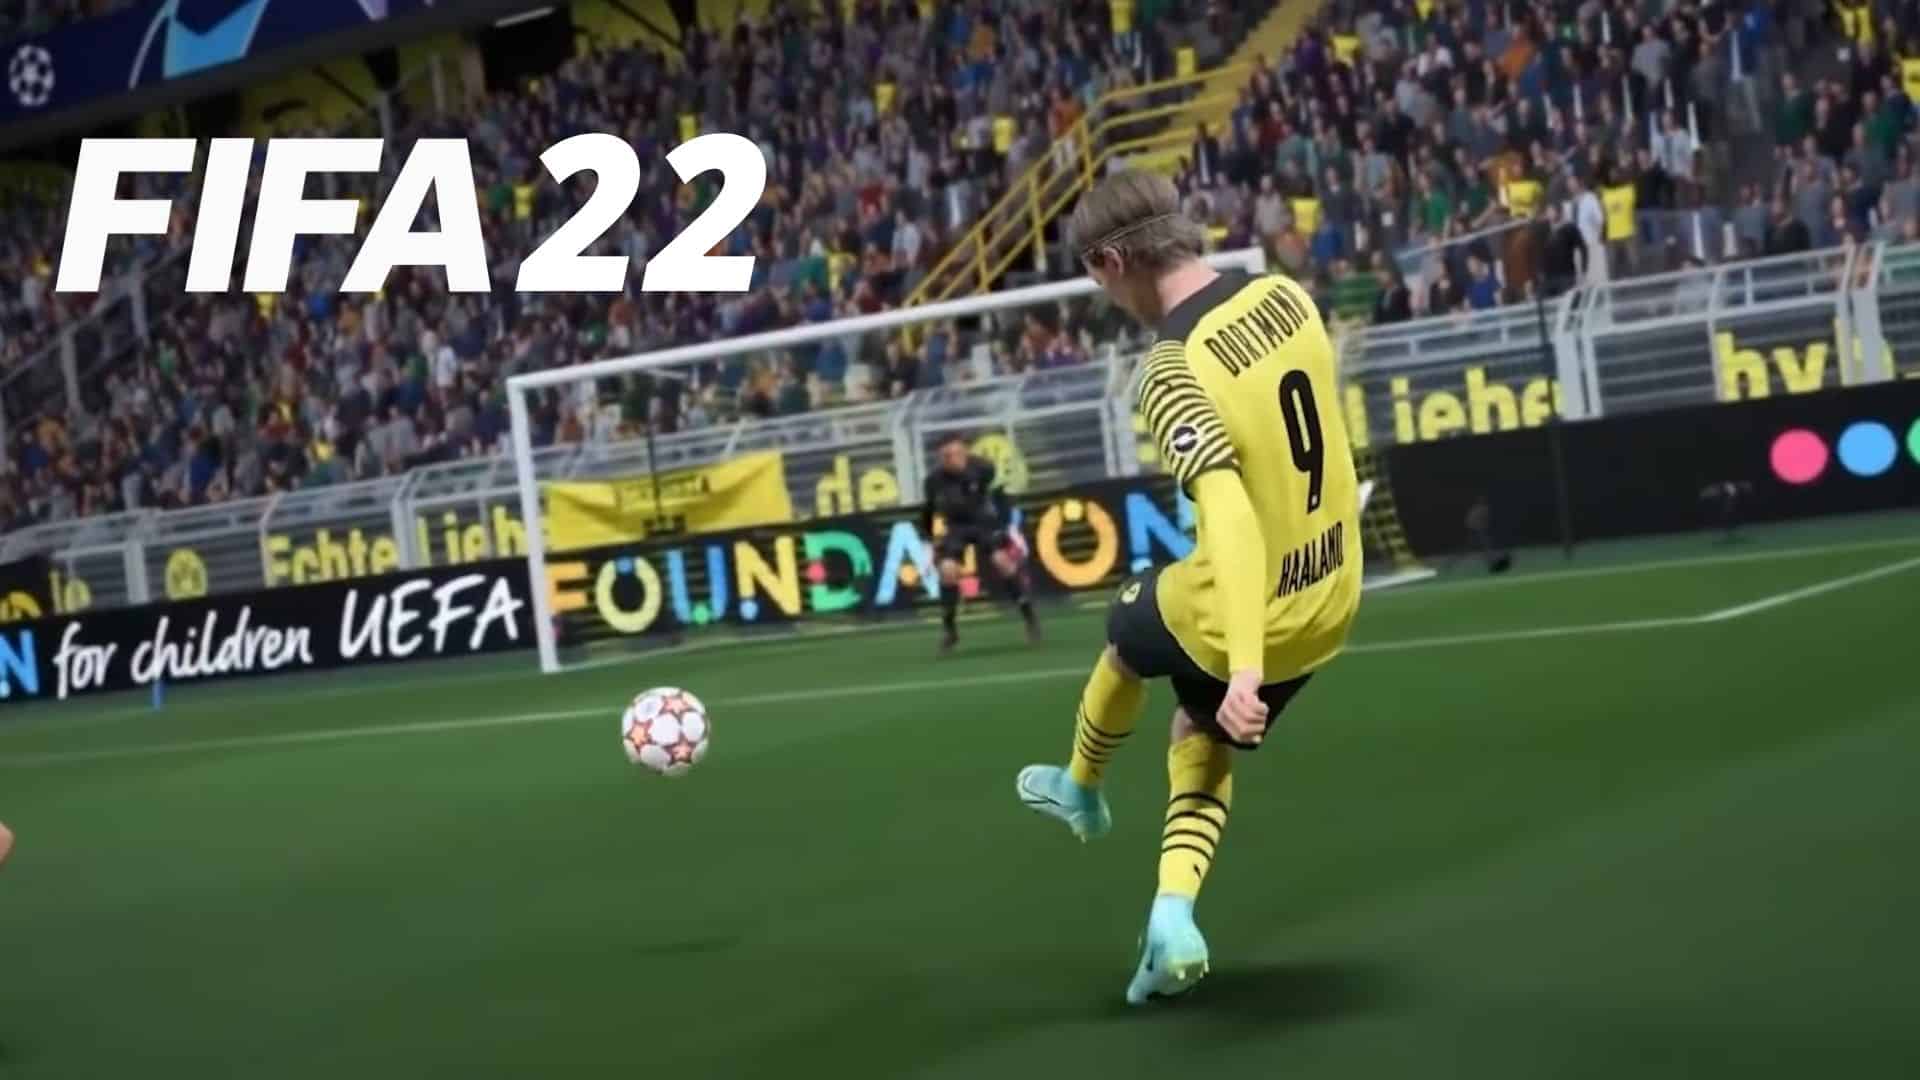 Haaland lining up a finesse shot in FIFA 22